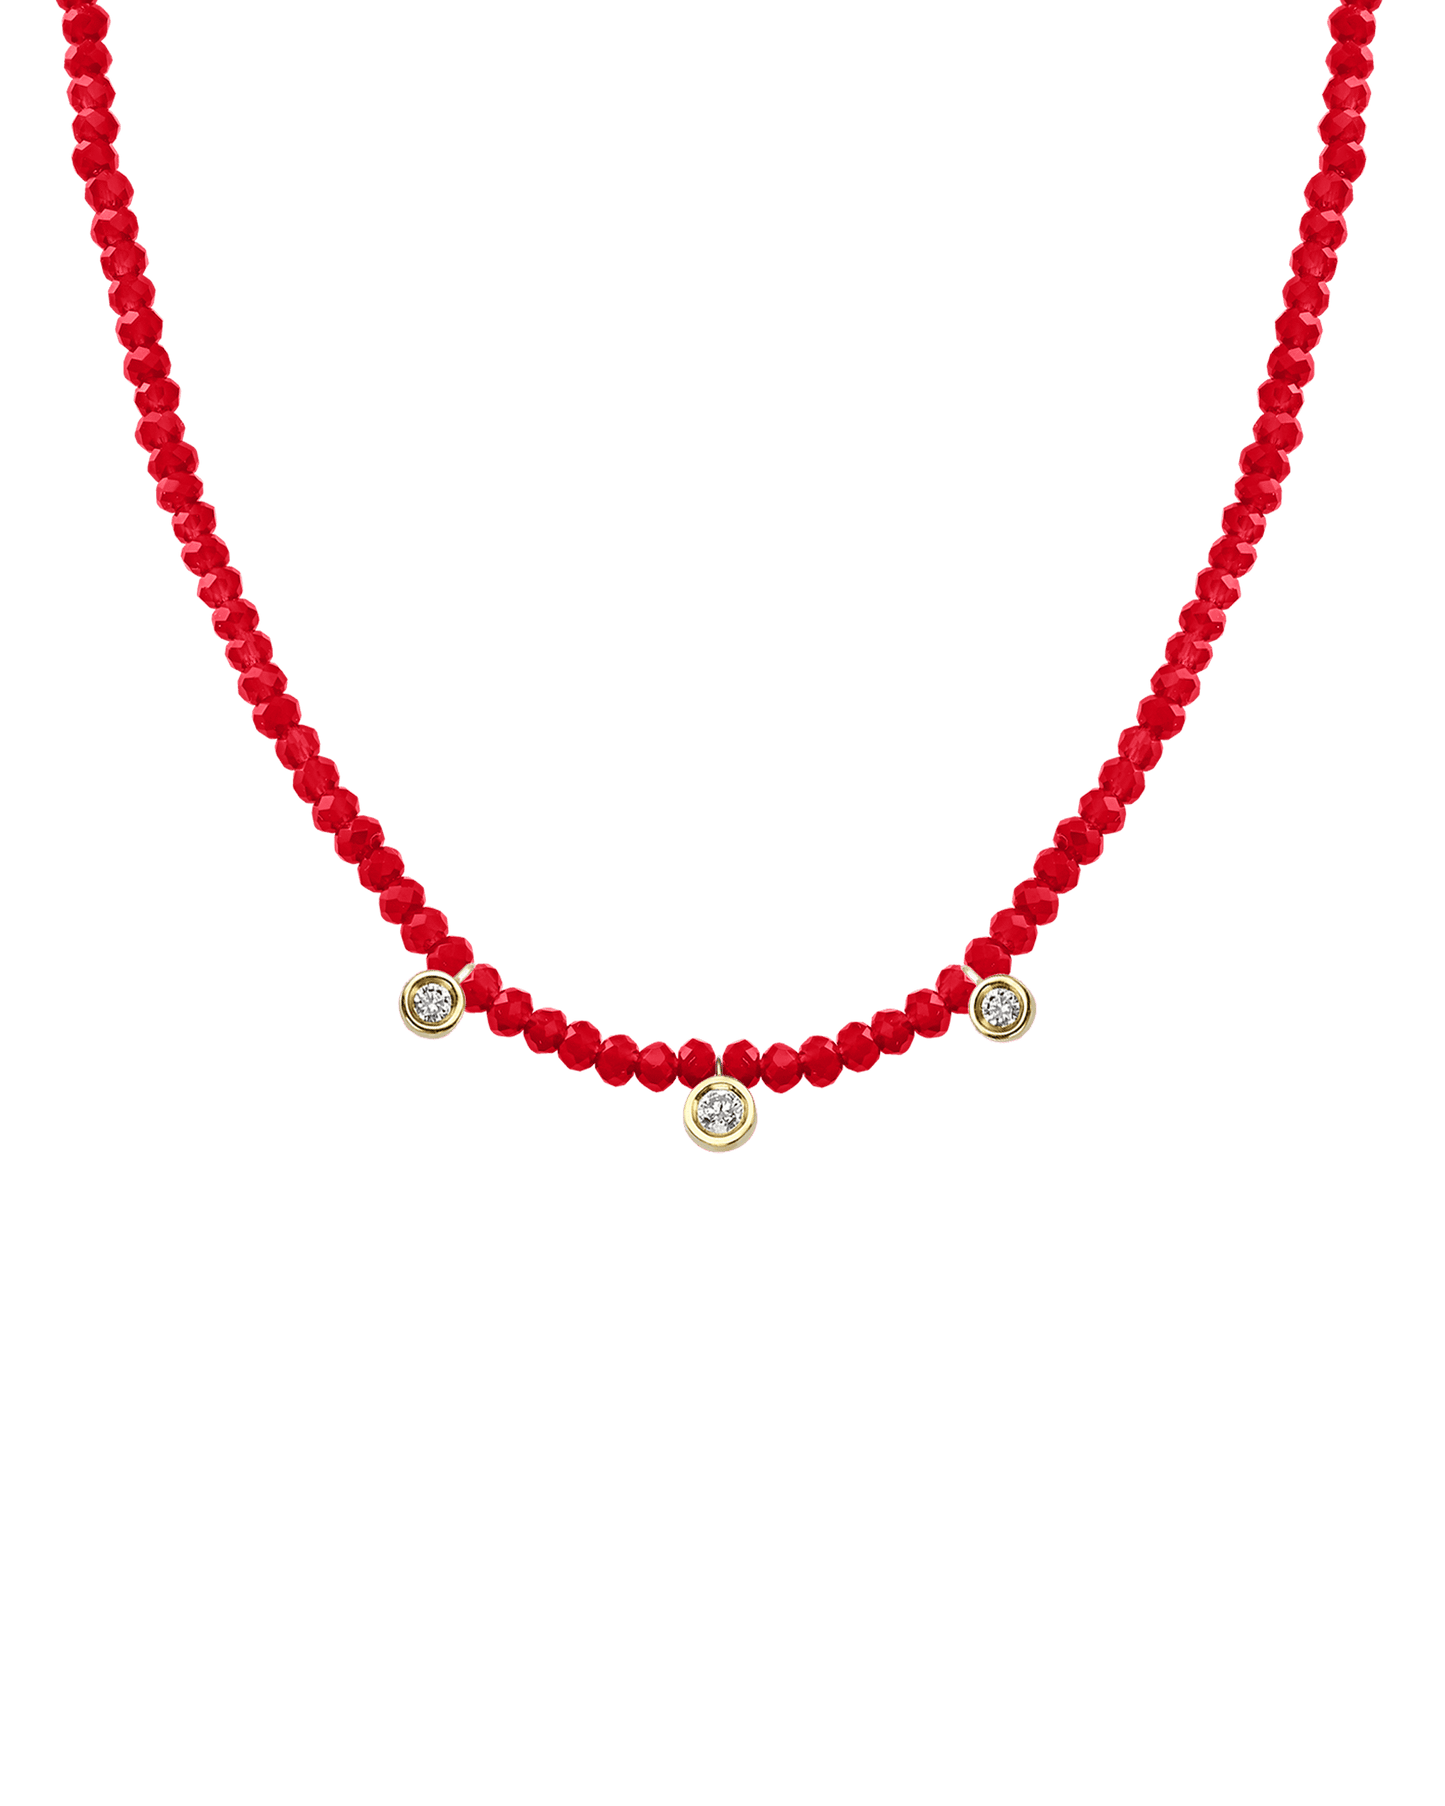 Emerald Gemstone & Three diamonds Necklace - 14K Yellow Gold Necklaces magal-dev Natural Red Jade 14" - Collar 